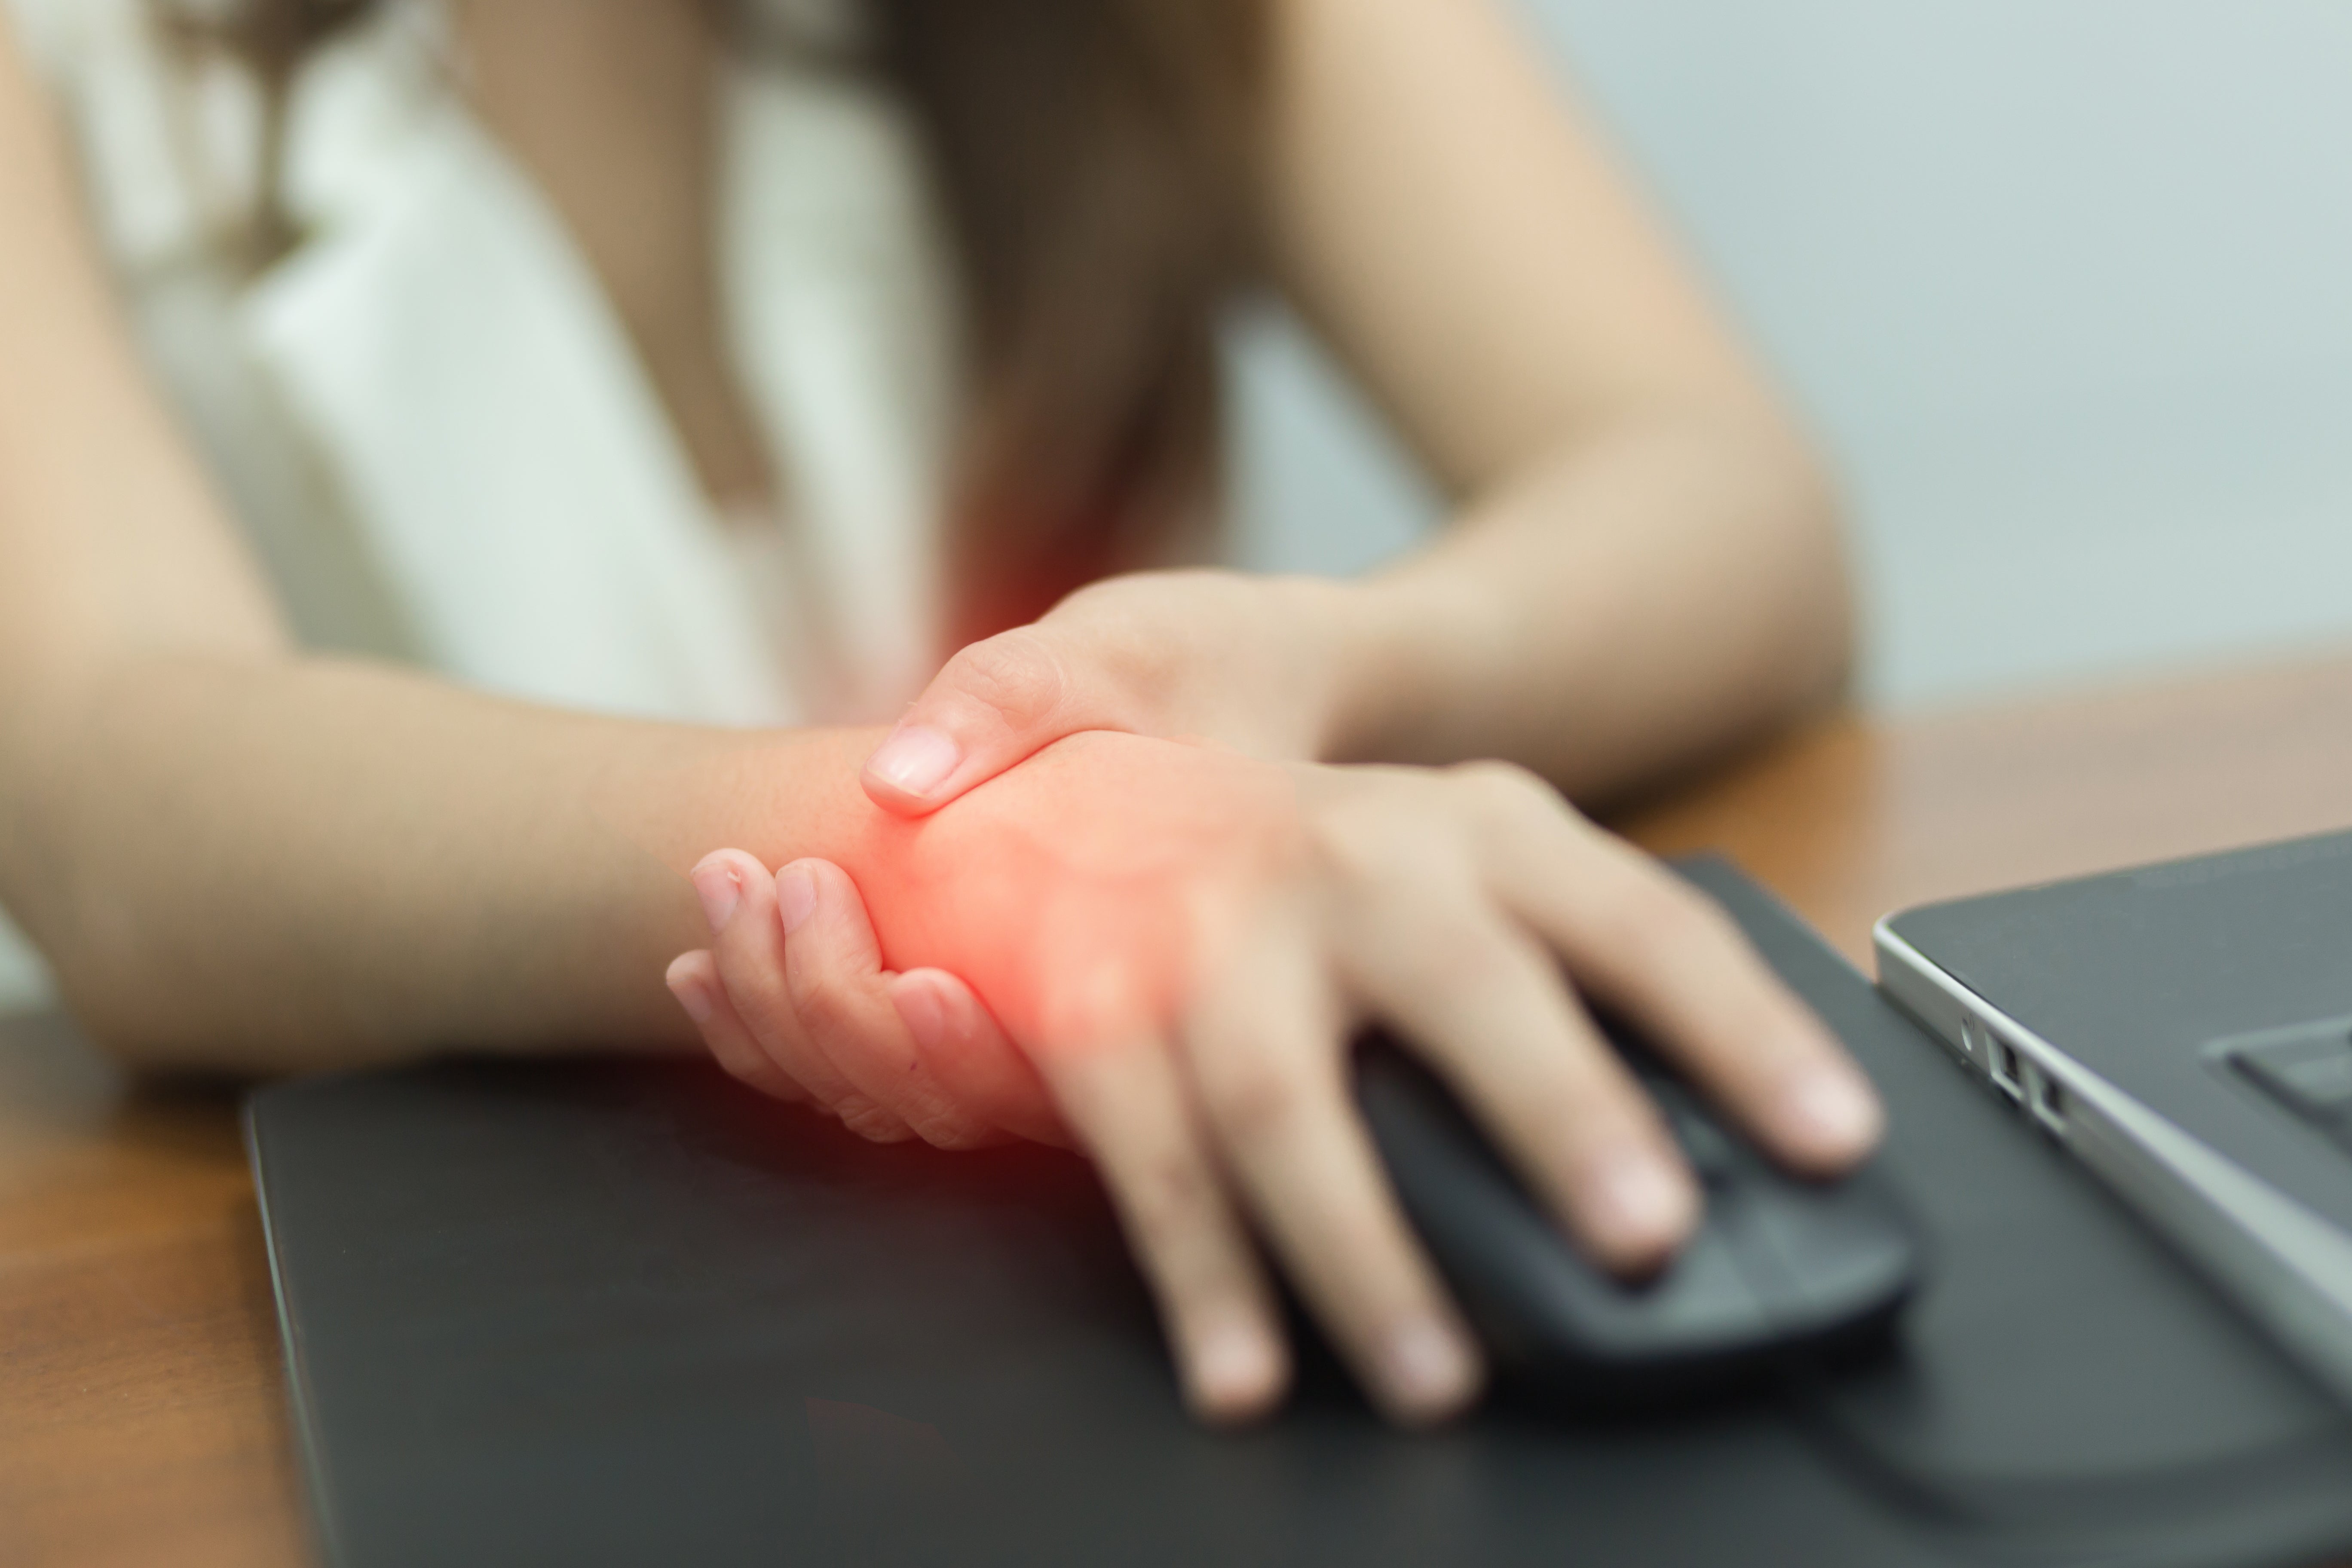 How to Prevent Common Hand or Wrist Injuries